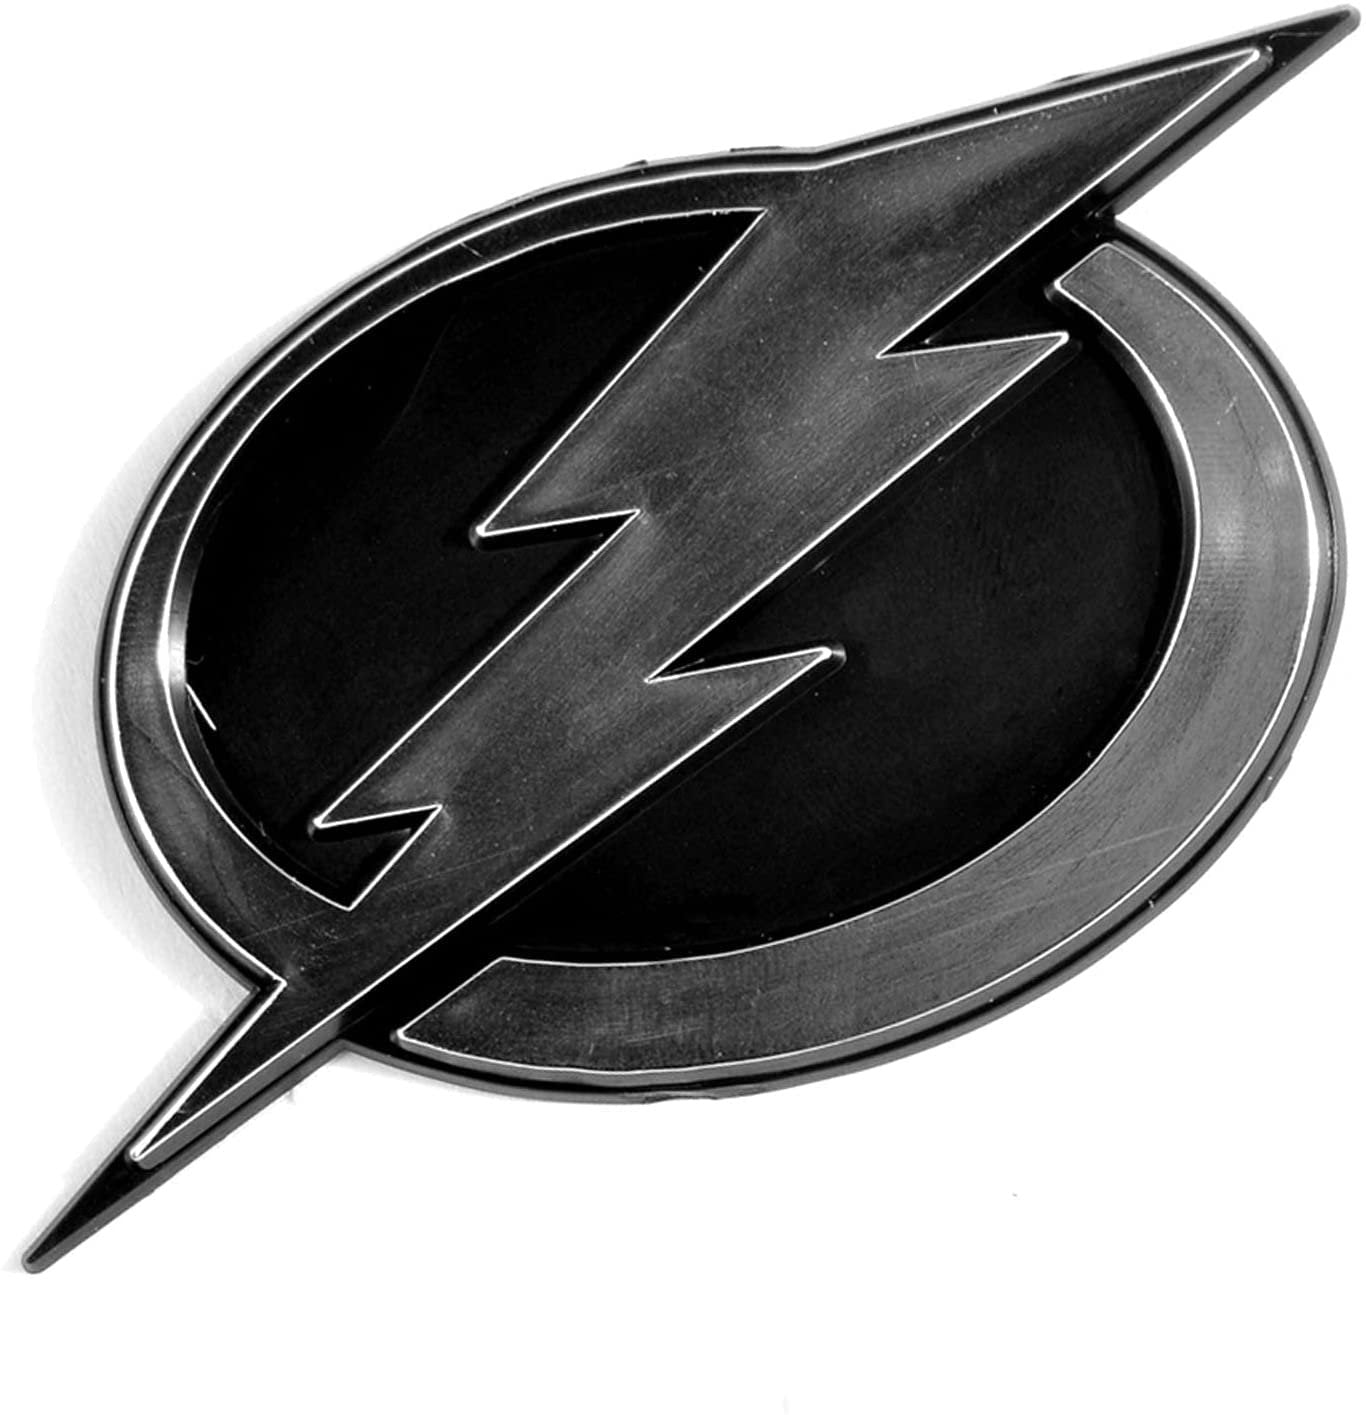 Tampa Bay Lightning Auto Emblem, Plastic Molded, Silver Chrome Color, Raised 3D Effect, Adhesive Backing